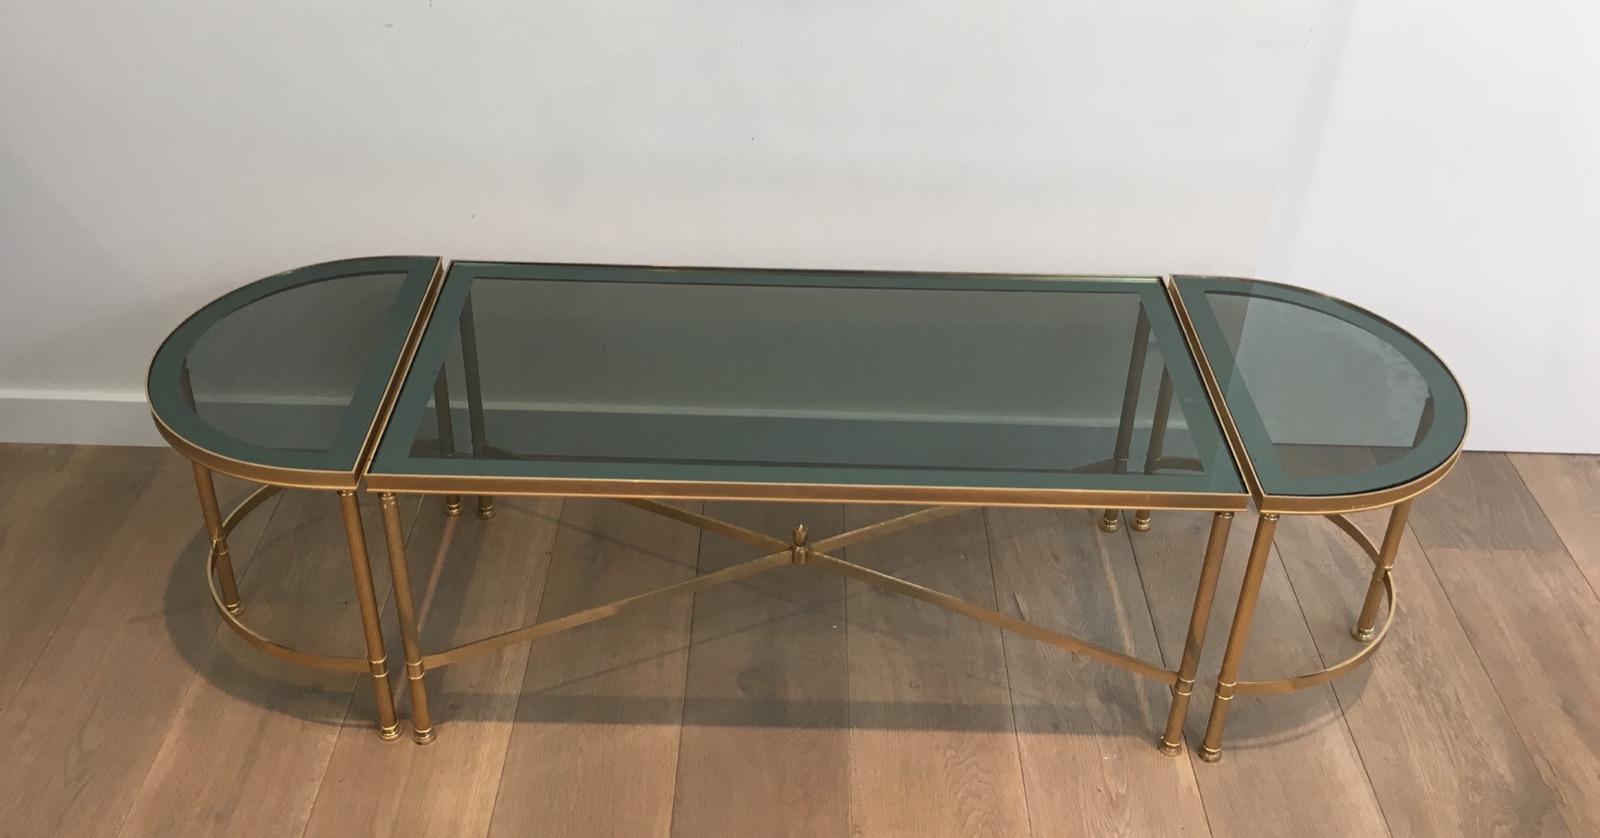 This tripartite coffee table is made of 3 elements made of gold gilt nickel with blueish glass tops mirrored on their surround. This coffee table is composed of a main rectangular coffee table with a pair of rounded side tables on each part of the